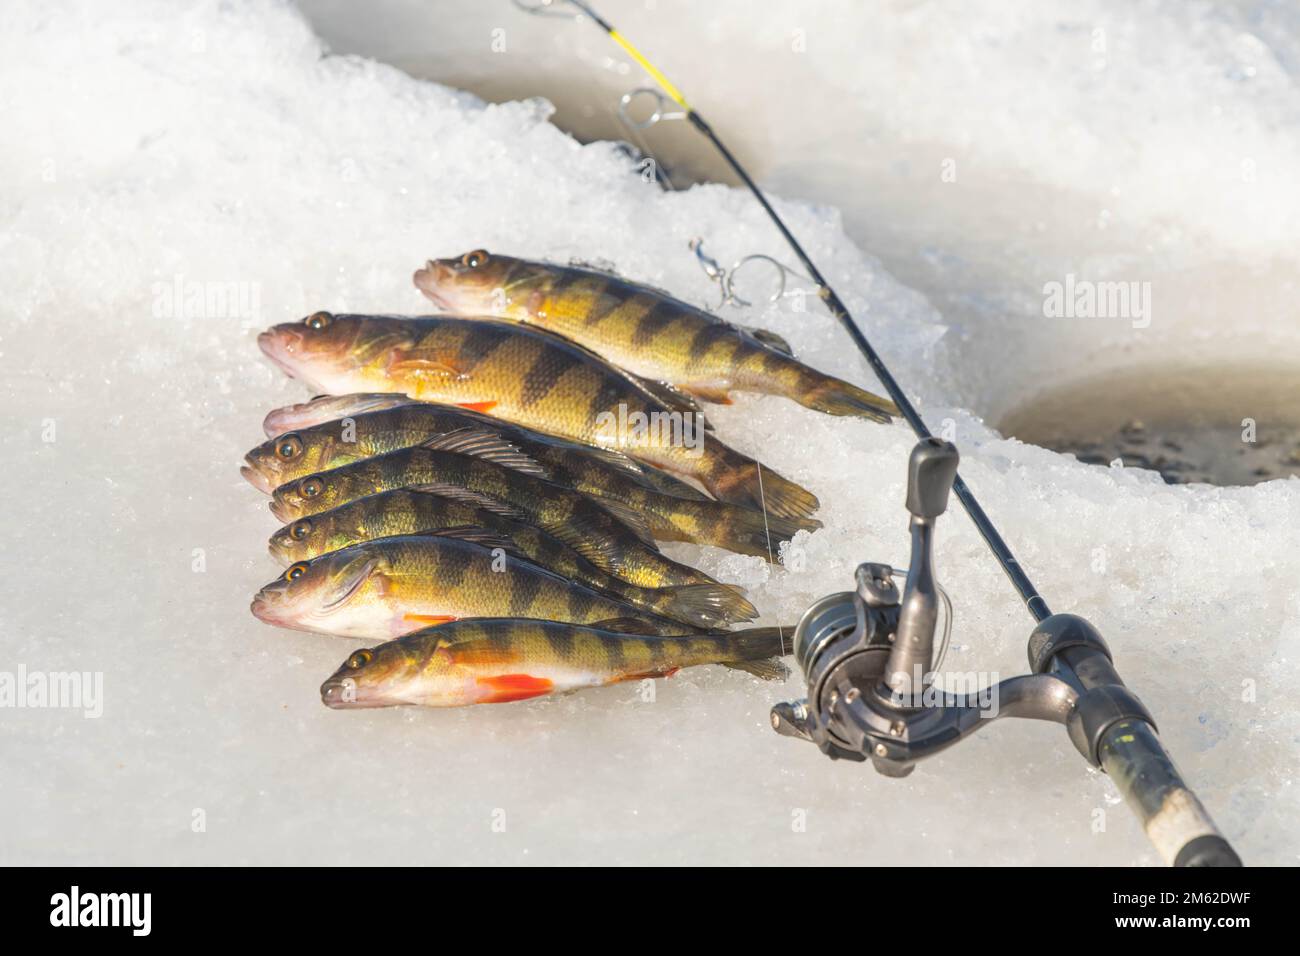 Yellow perch ice fishing day nice catch, freshwater lake, outdoor winter  activity Stock Photo - Alamy